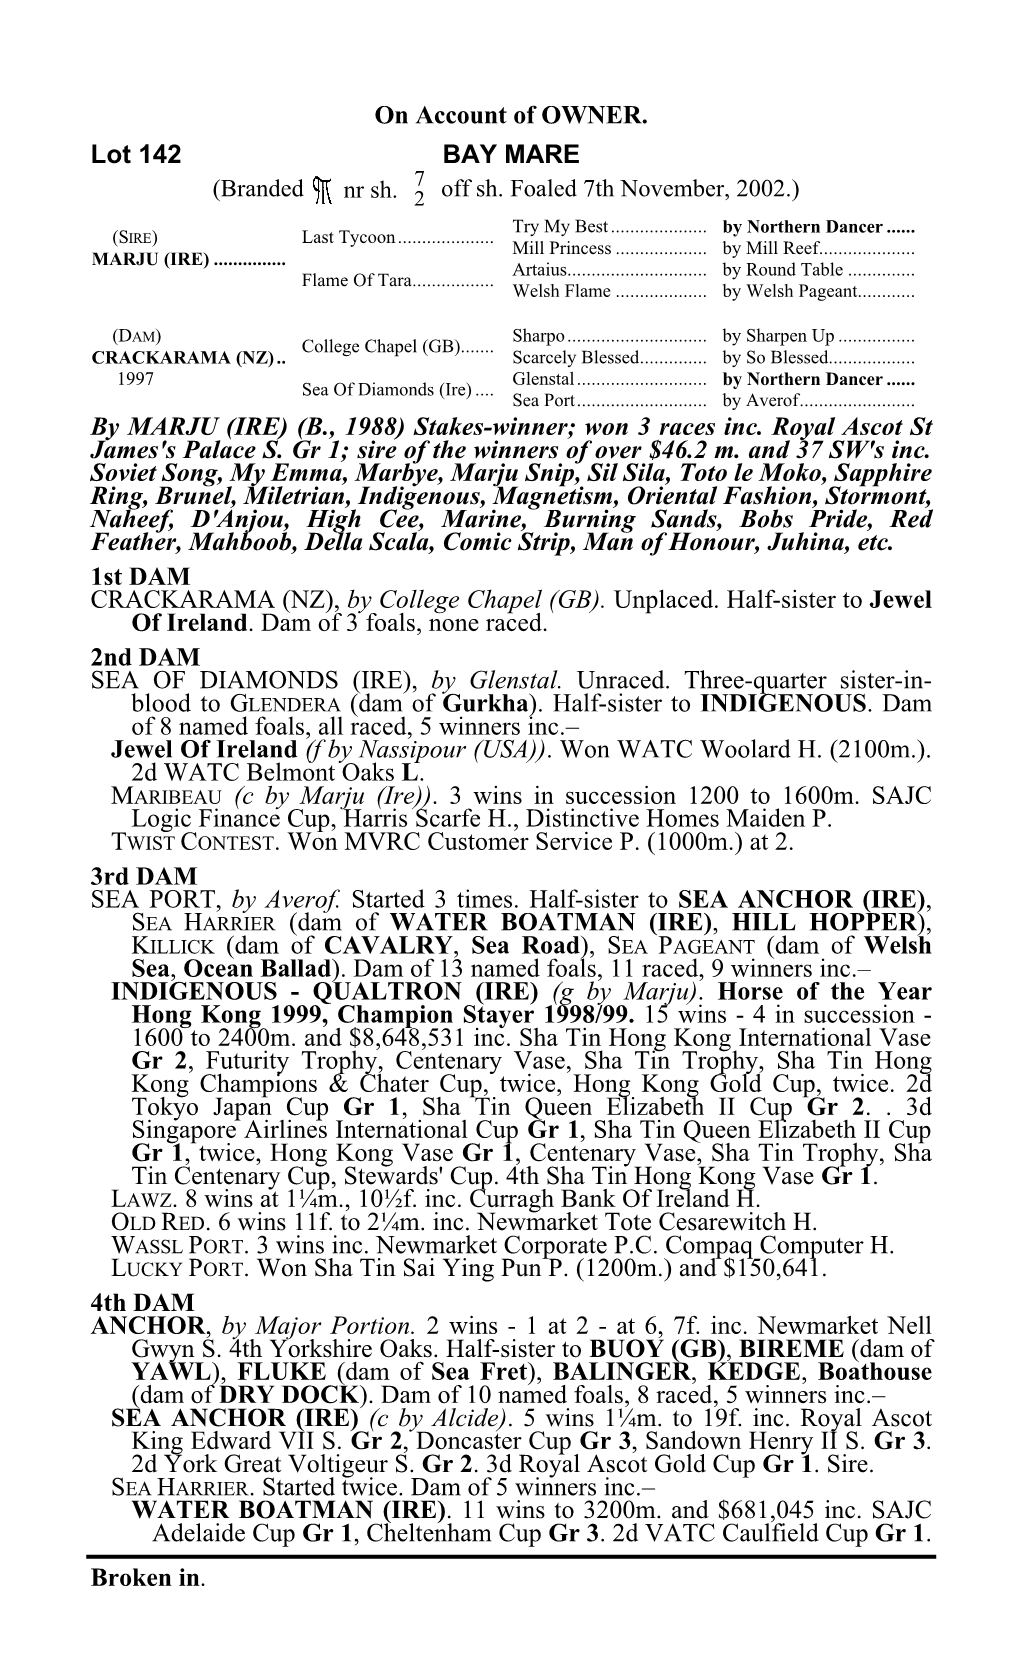 Stakes-Winner; Won 3 Races Inc. Royal Ascot St James's Palace S. Gr 1; Sire of the Winners of Over $46.2 M